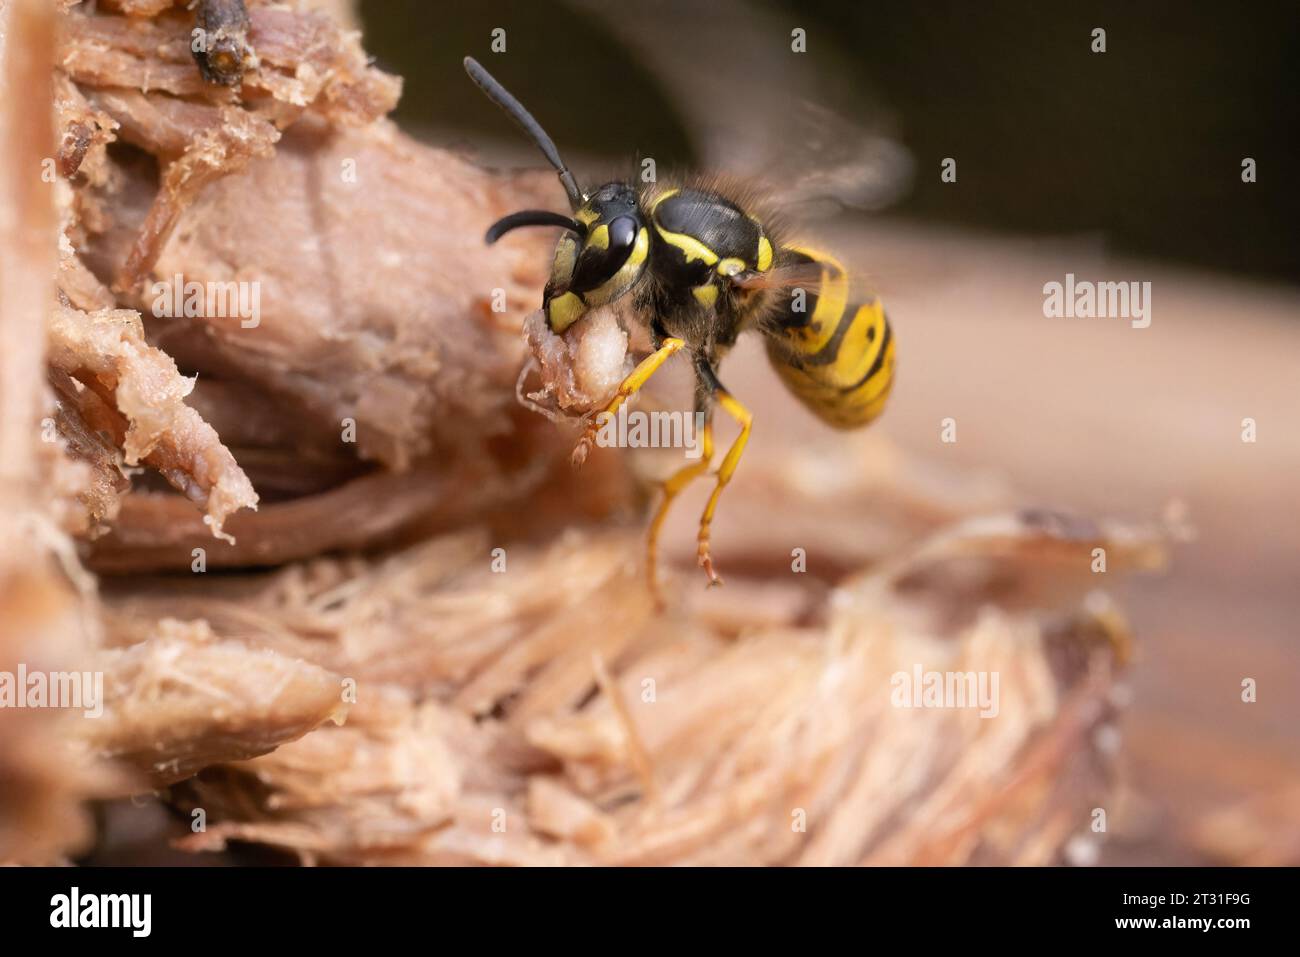 Common wasp stealing food from a summer barbecue - annoying but fascinating behaviour, as this industrious and maligned insect provisions its colony. Stock Photo